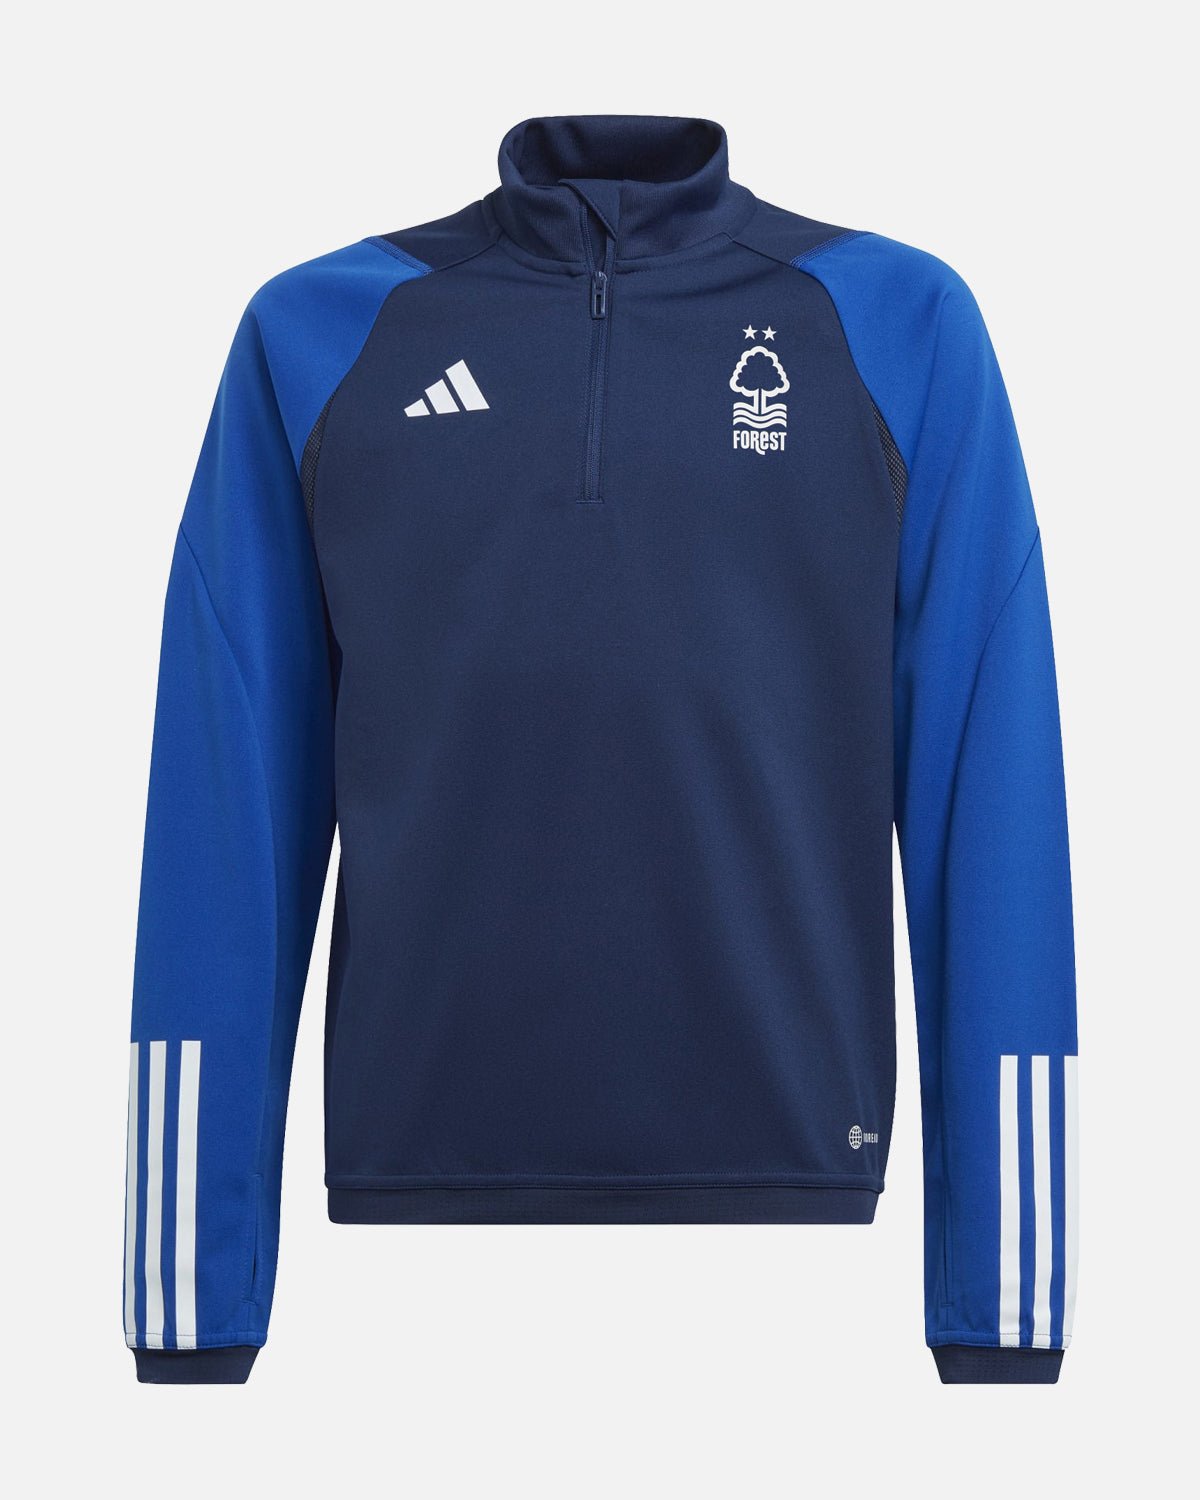 NFFC Junior Navy Training Top 23-24 - Nottingham Forest FC